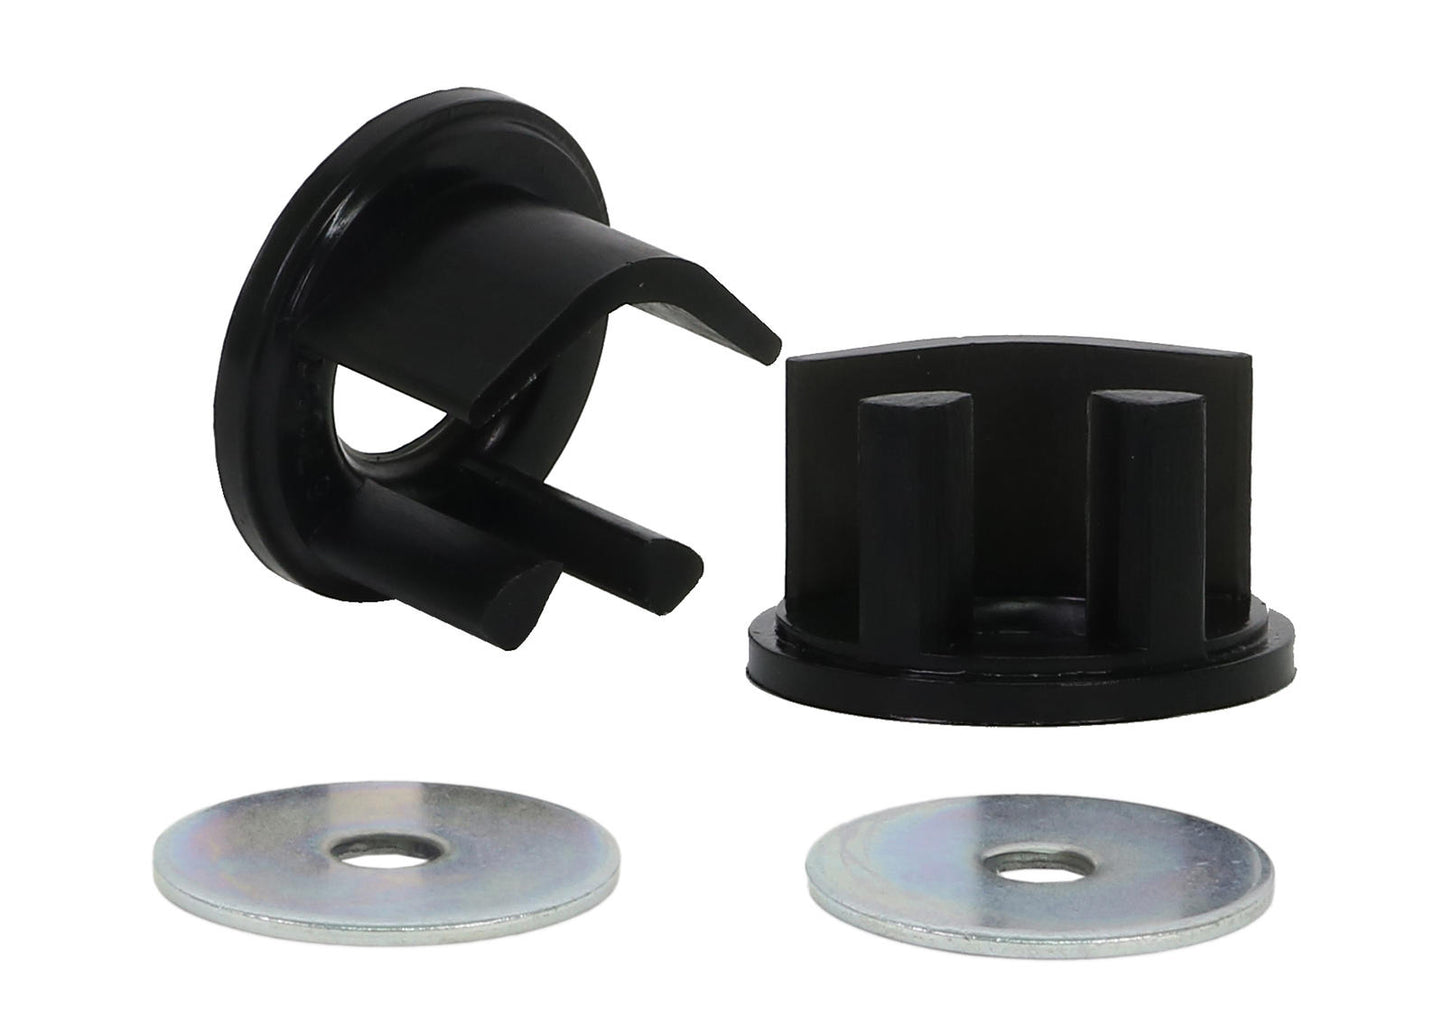 Positive Diff Retention - mount in cradle bushing inserts - Subaru Legacy & Outback